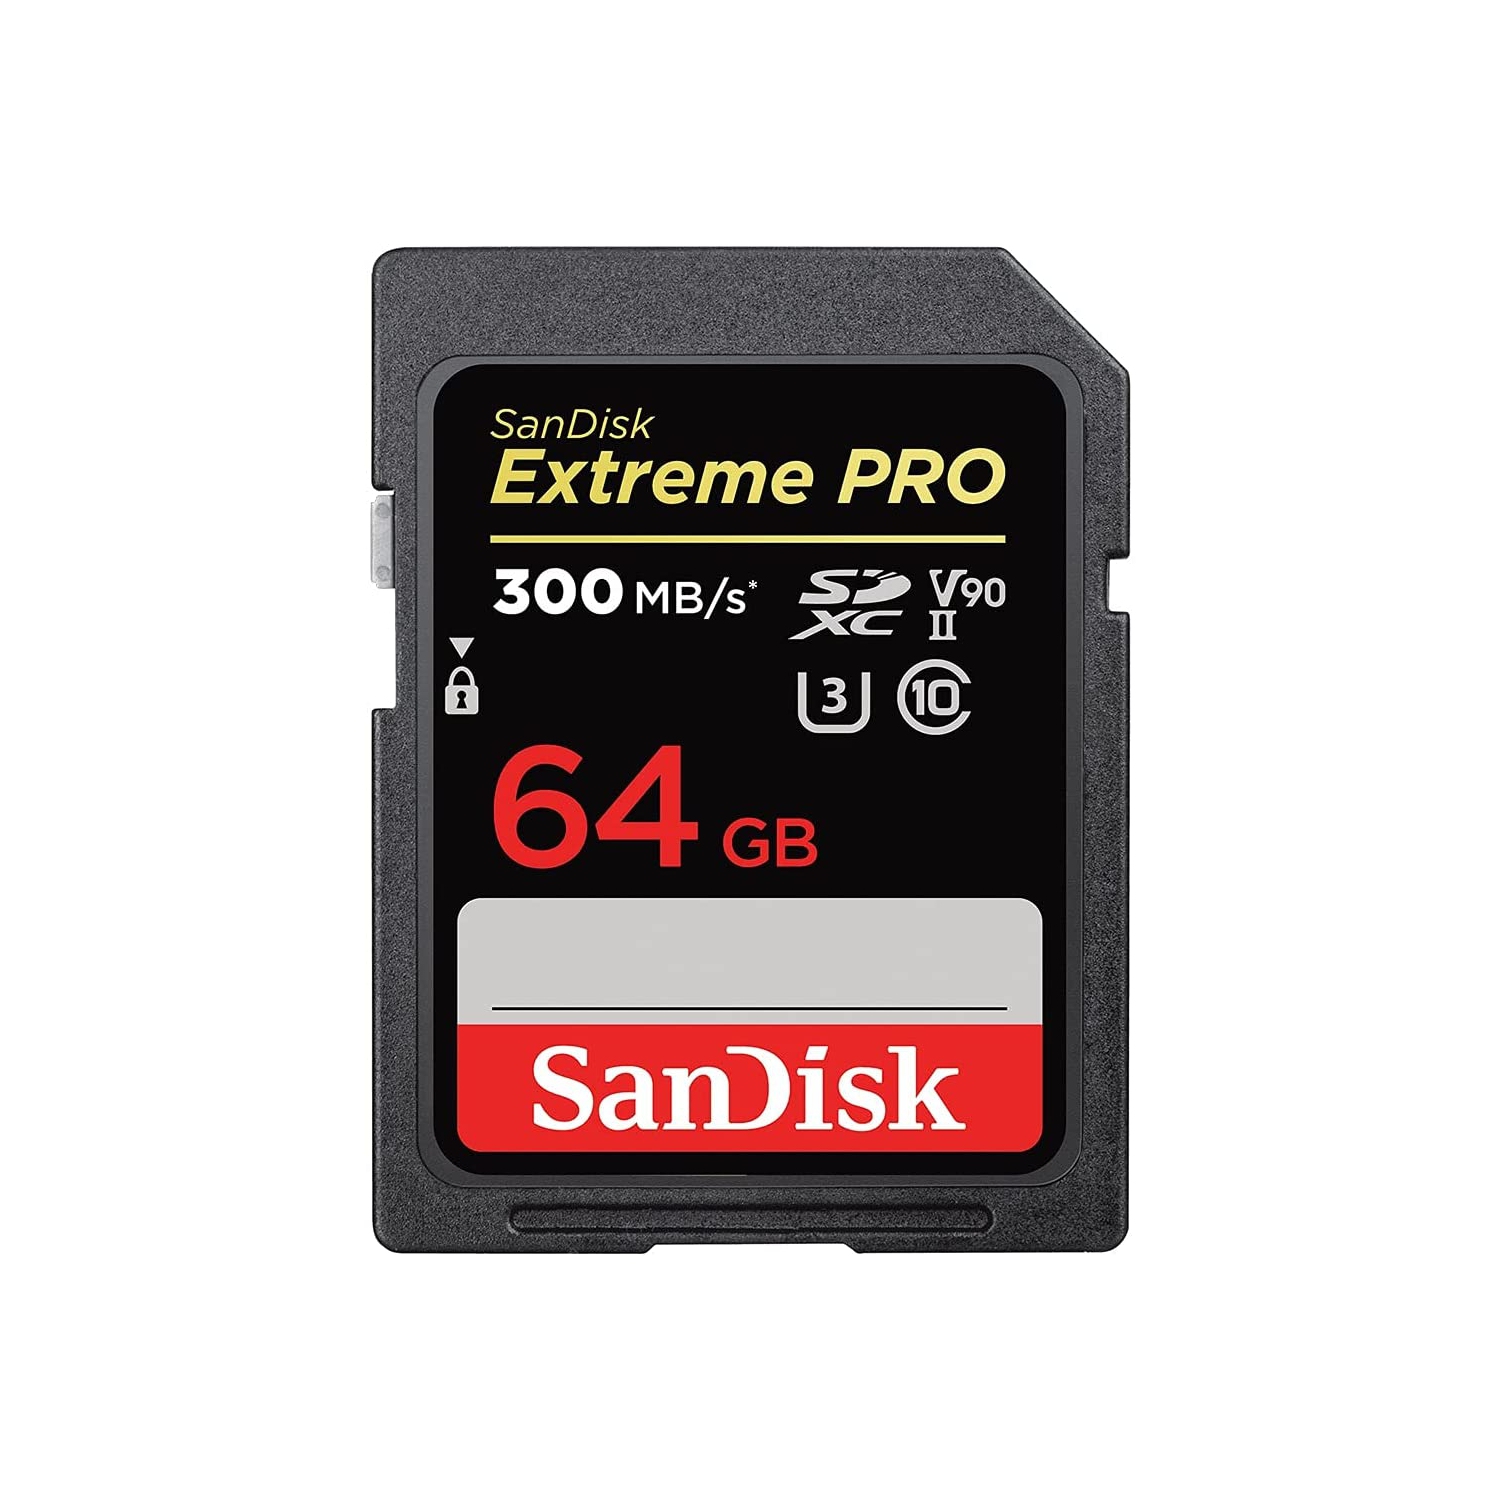 SanDisk 64GB Extreme Pro SDXC UHS-II Memory Card 300 MB/s - (SDSDXDK-064G-GN4IN)